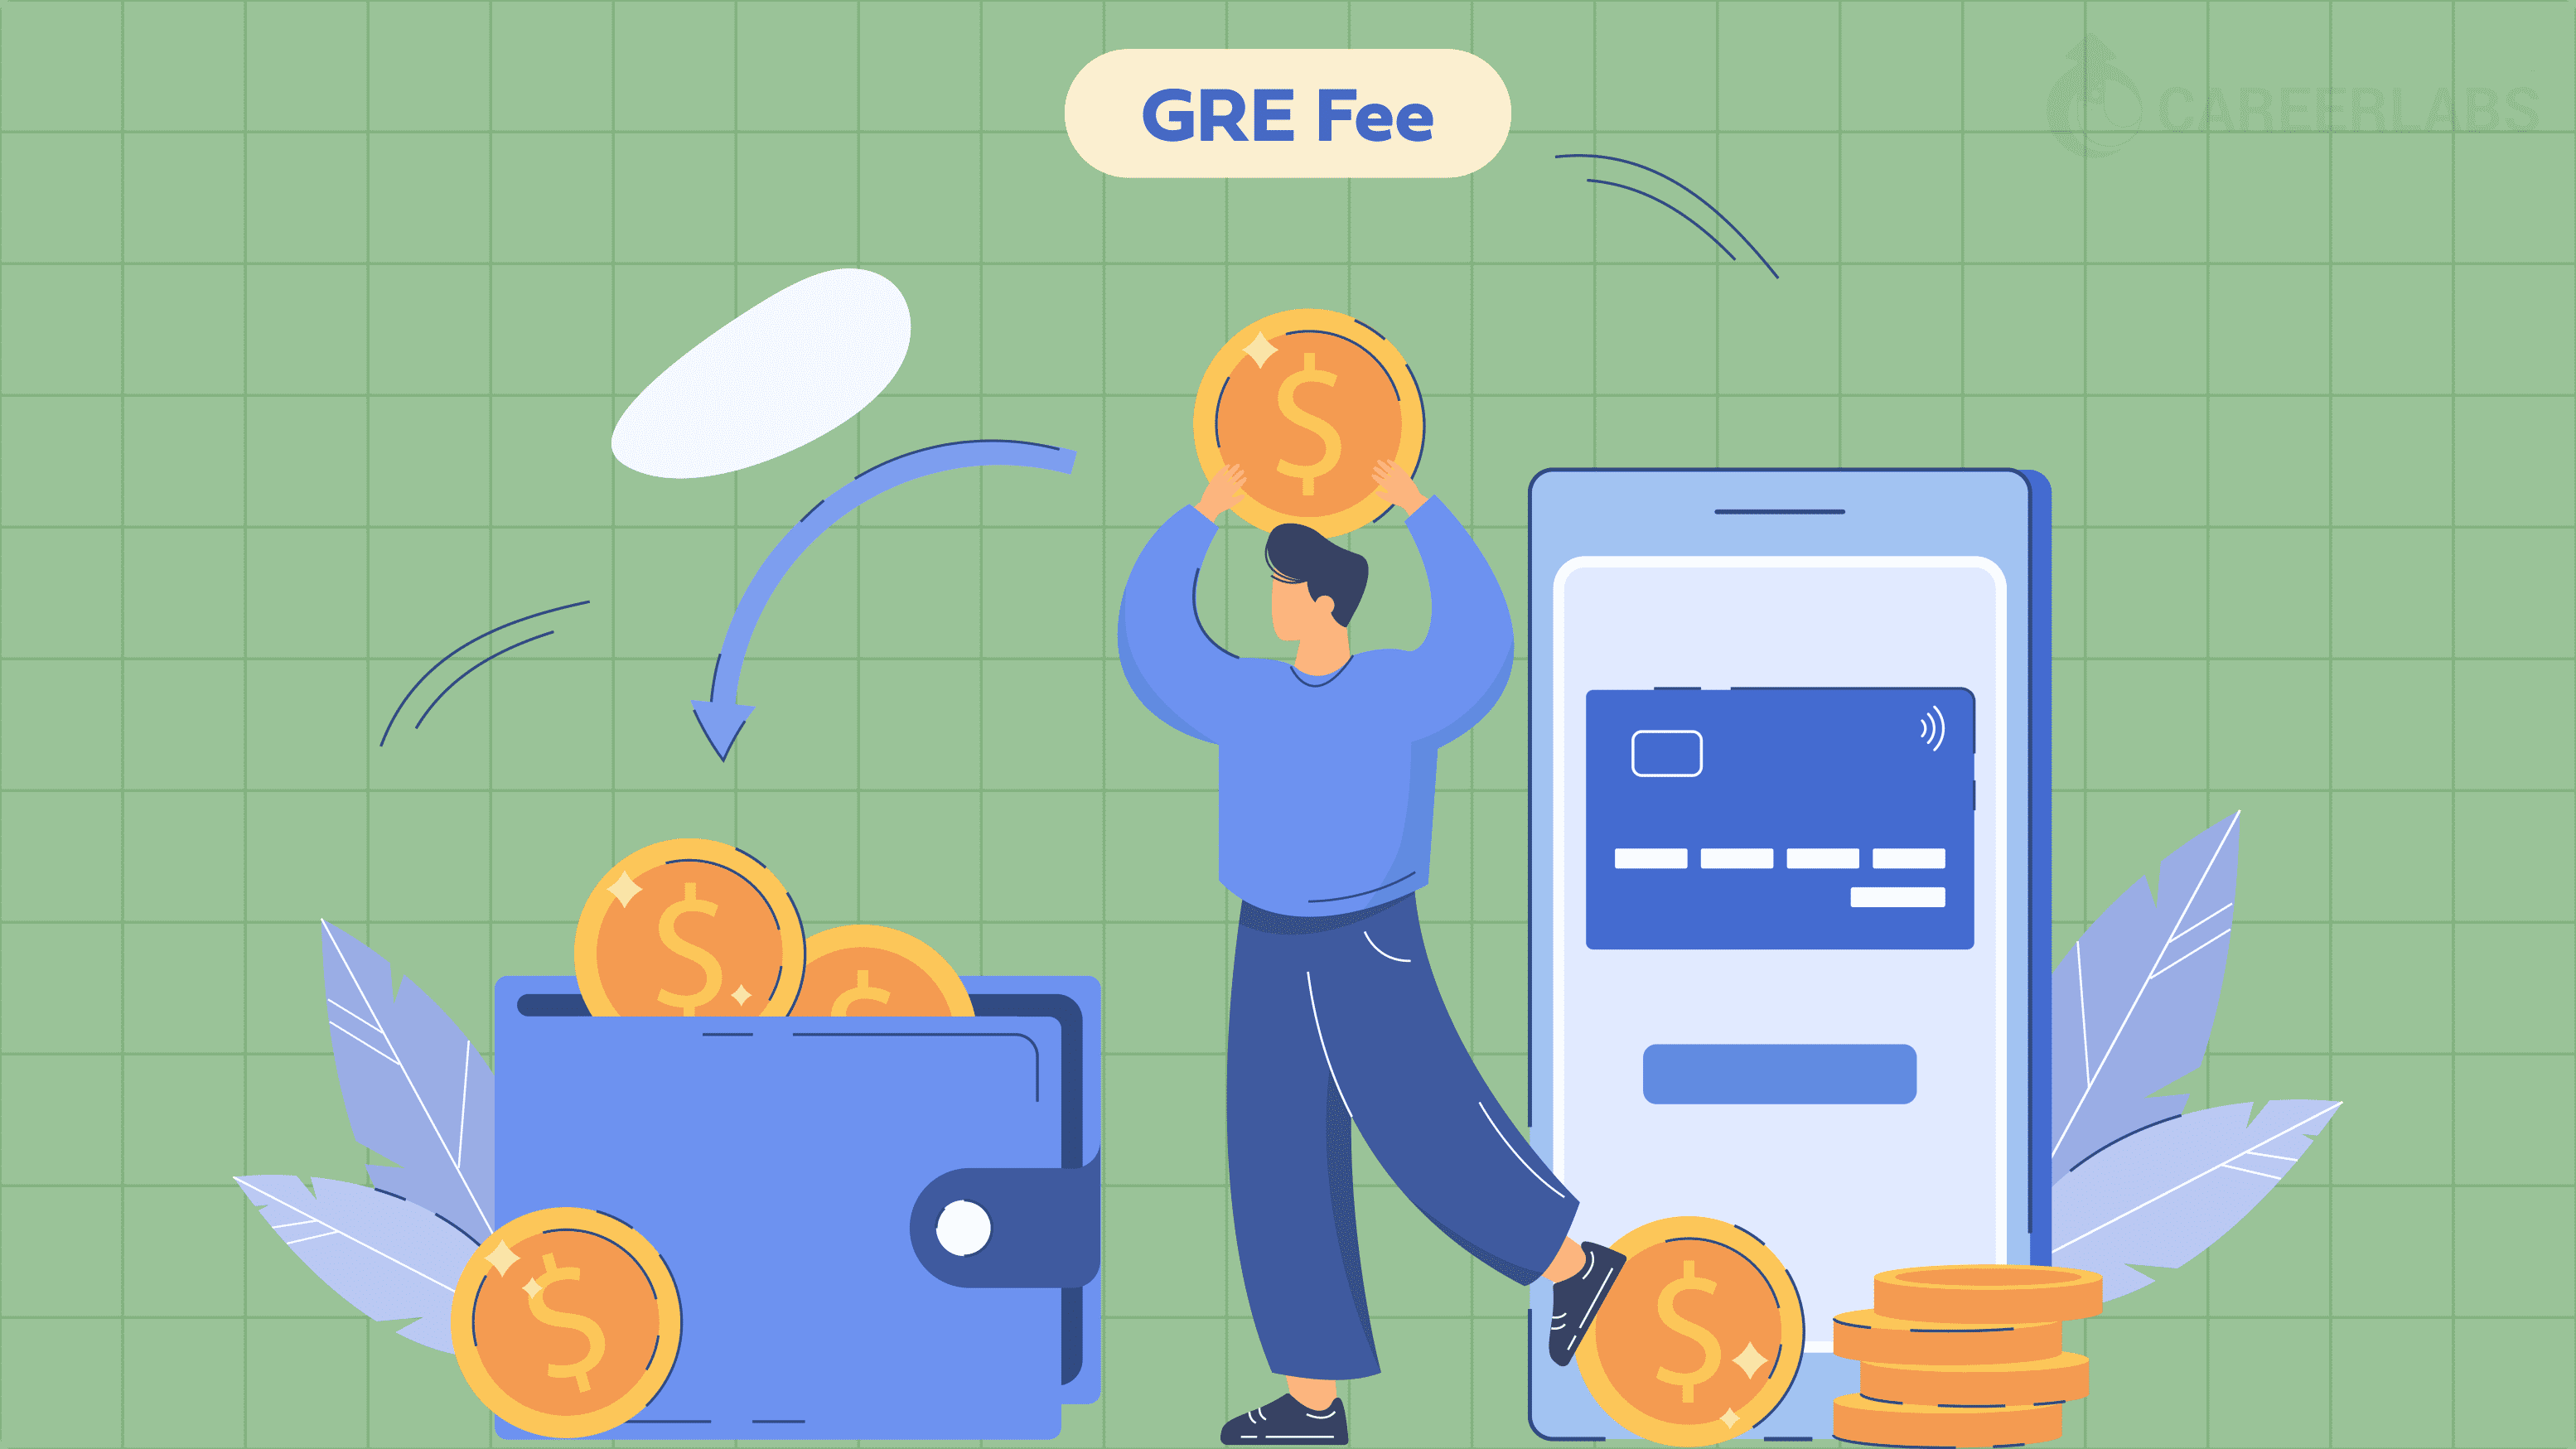 GRE Fee GRE Exam Fee, Additional Fees, Payment Mode